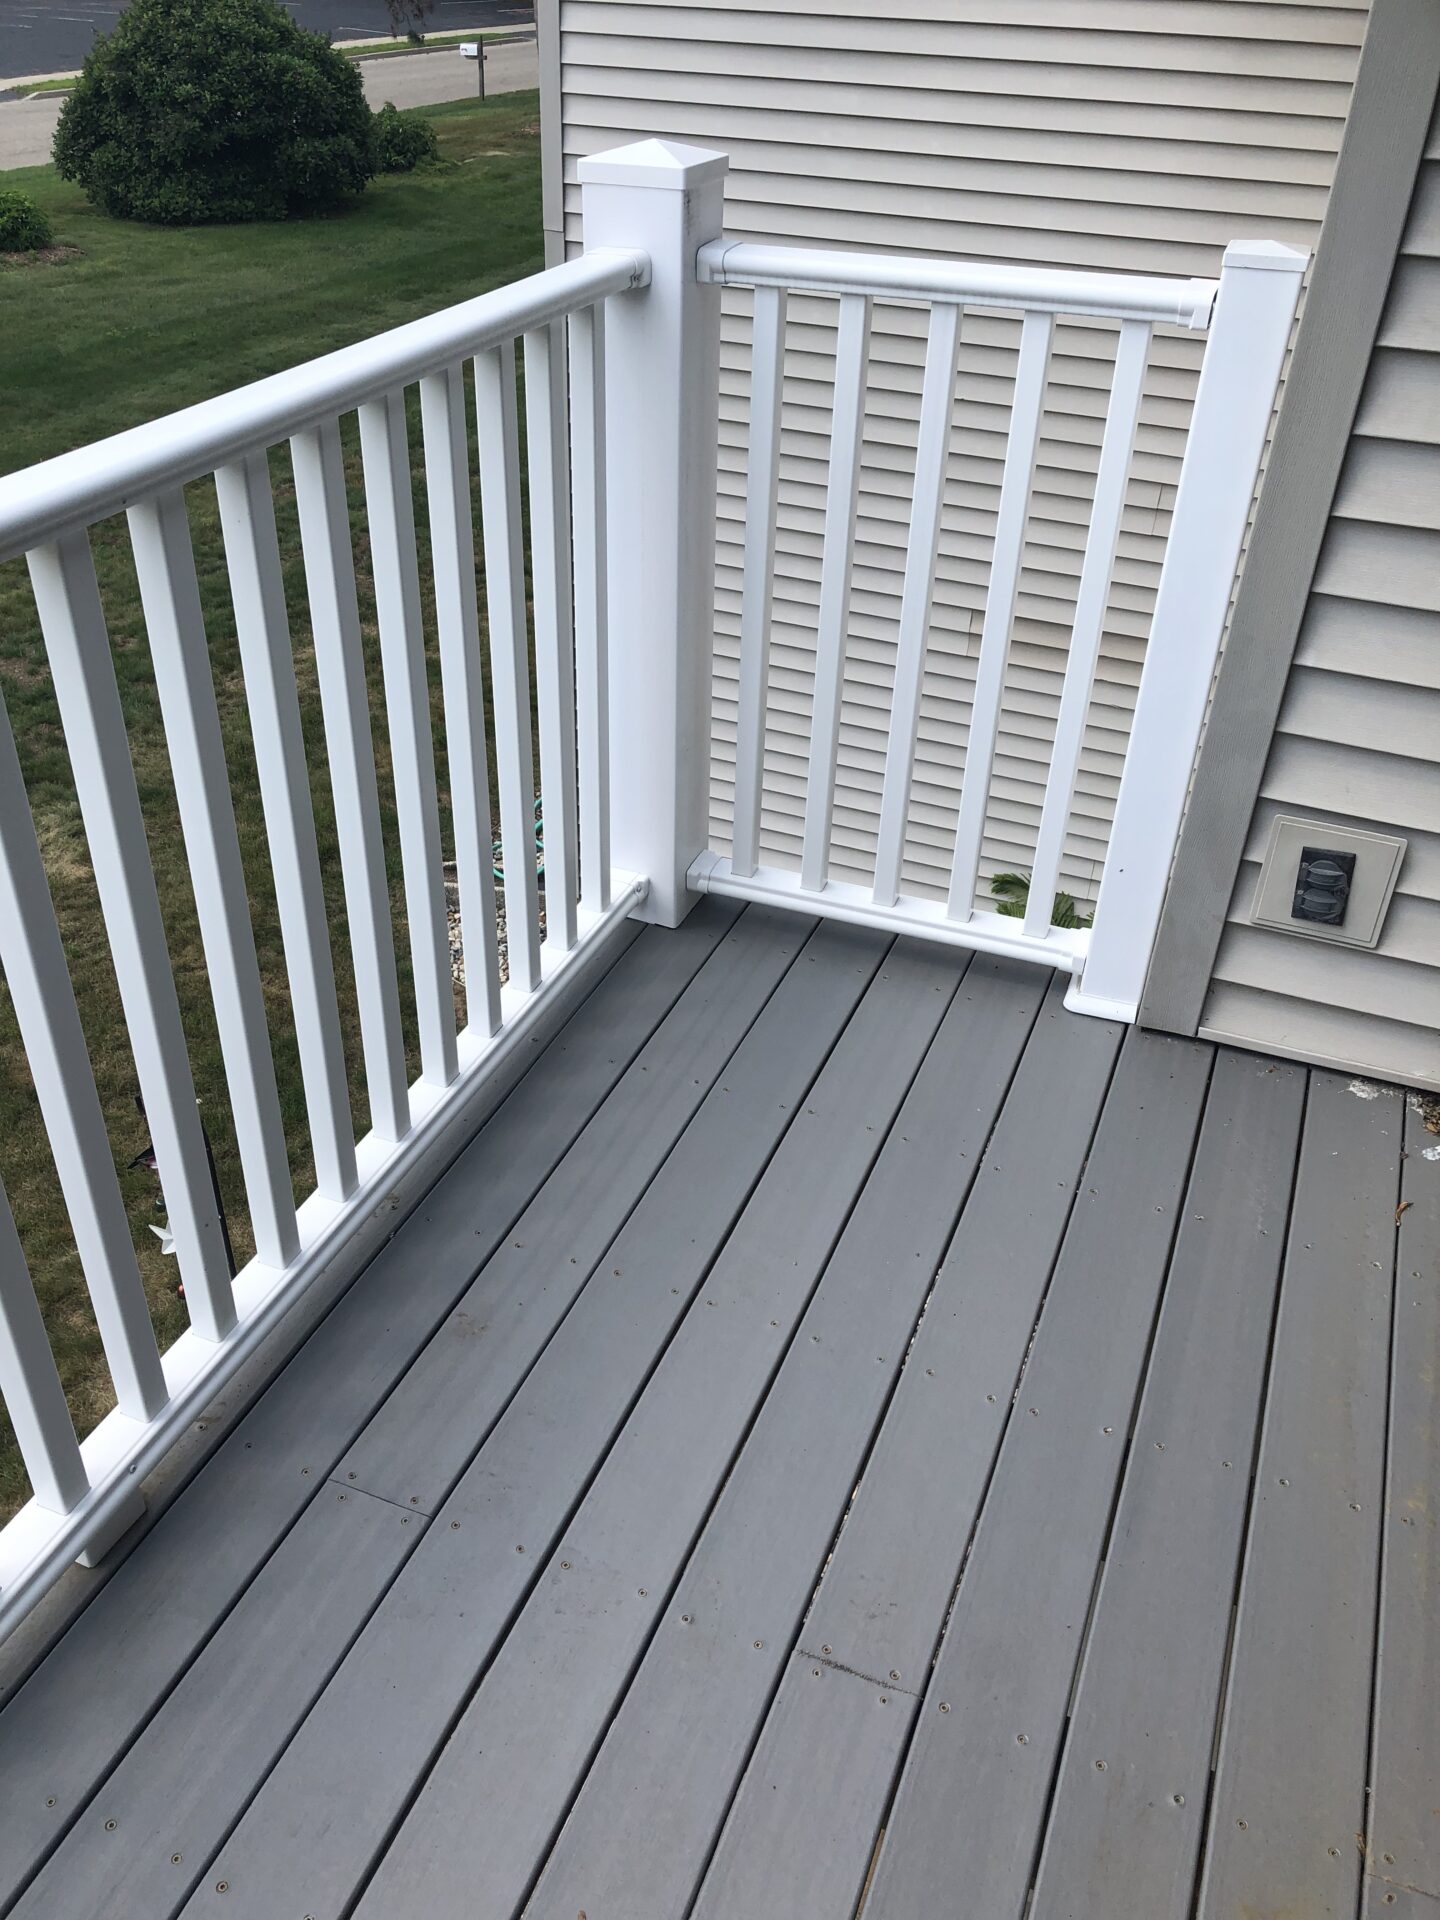 Pine Grove Terrace Apartments deck white and grey